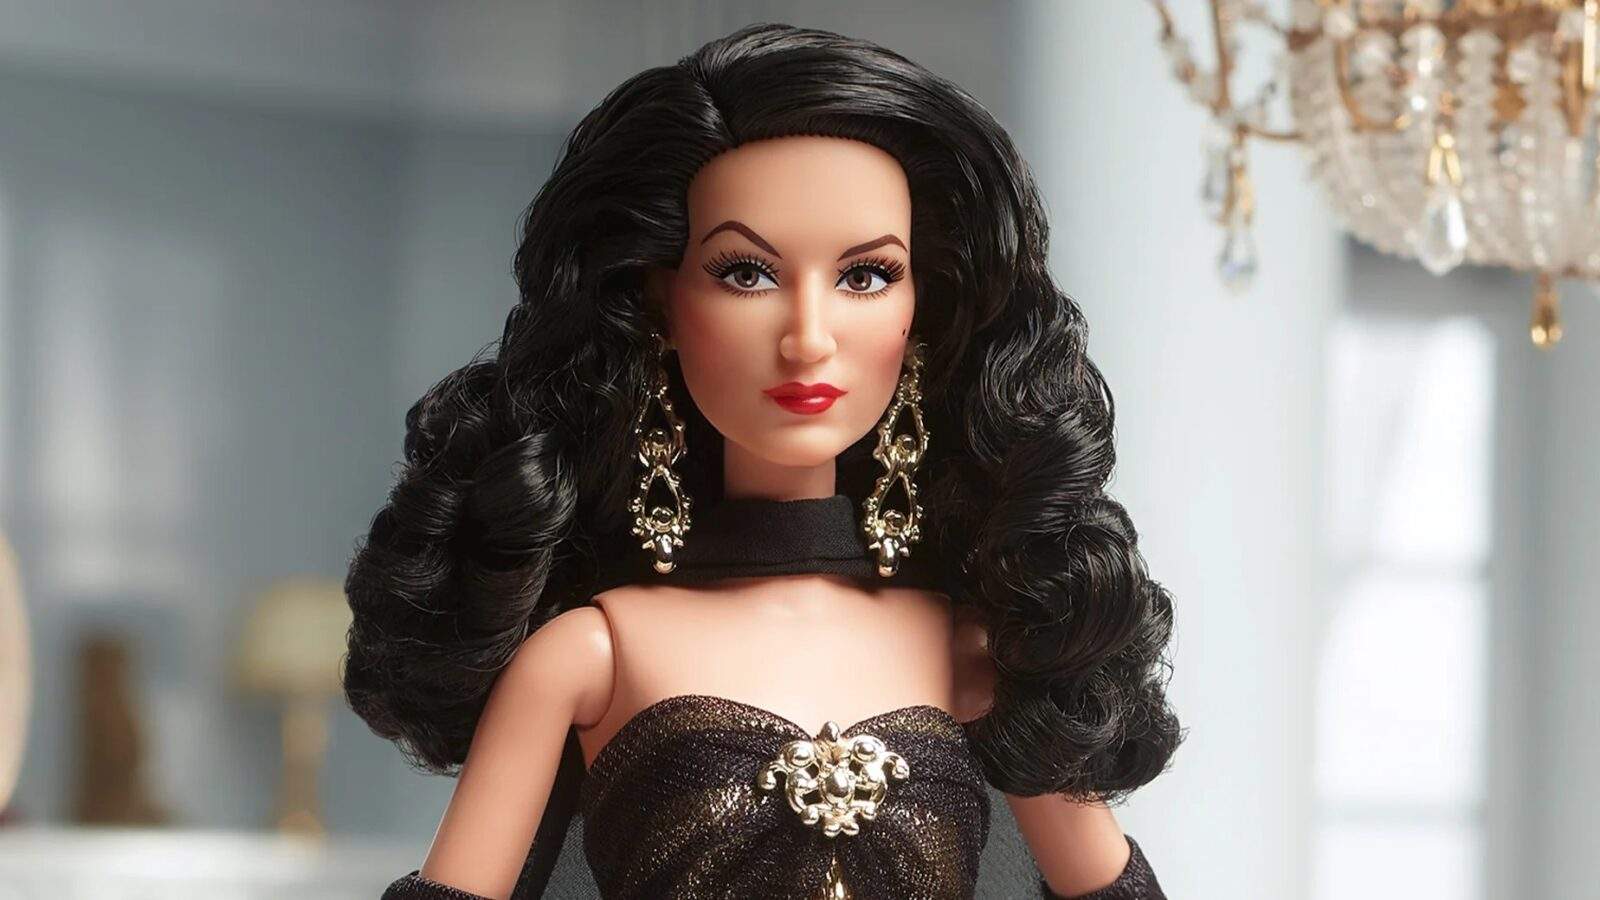 Shop the Barbie Collectible Dolls Inspired By the Movie Restock